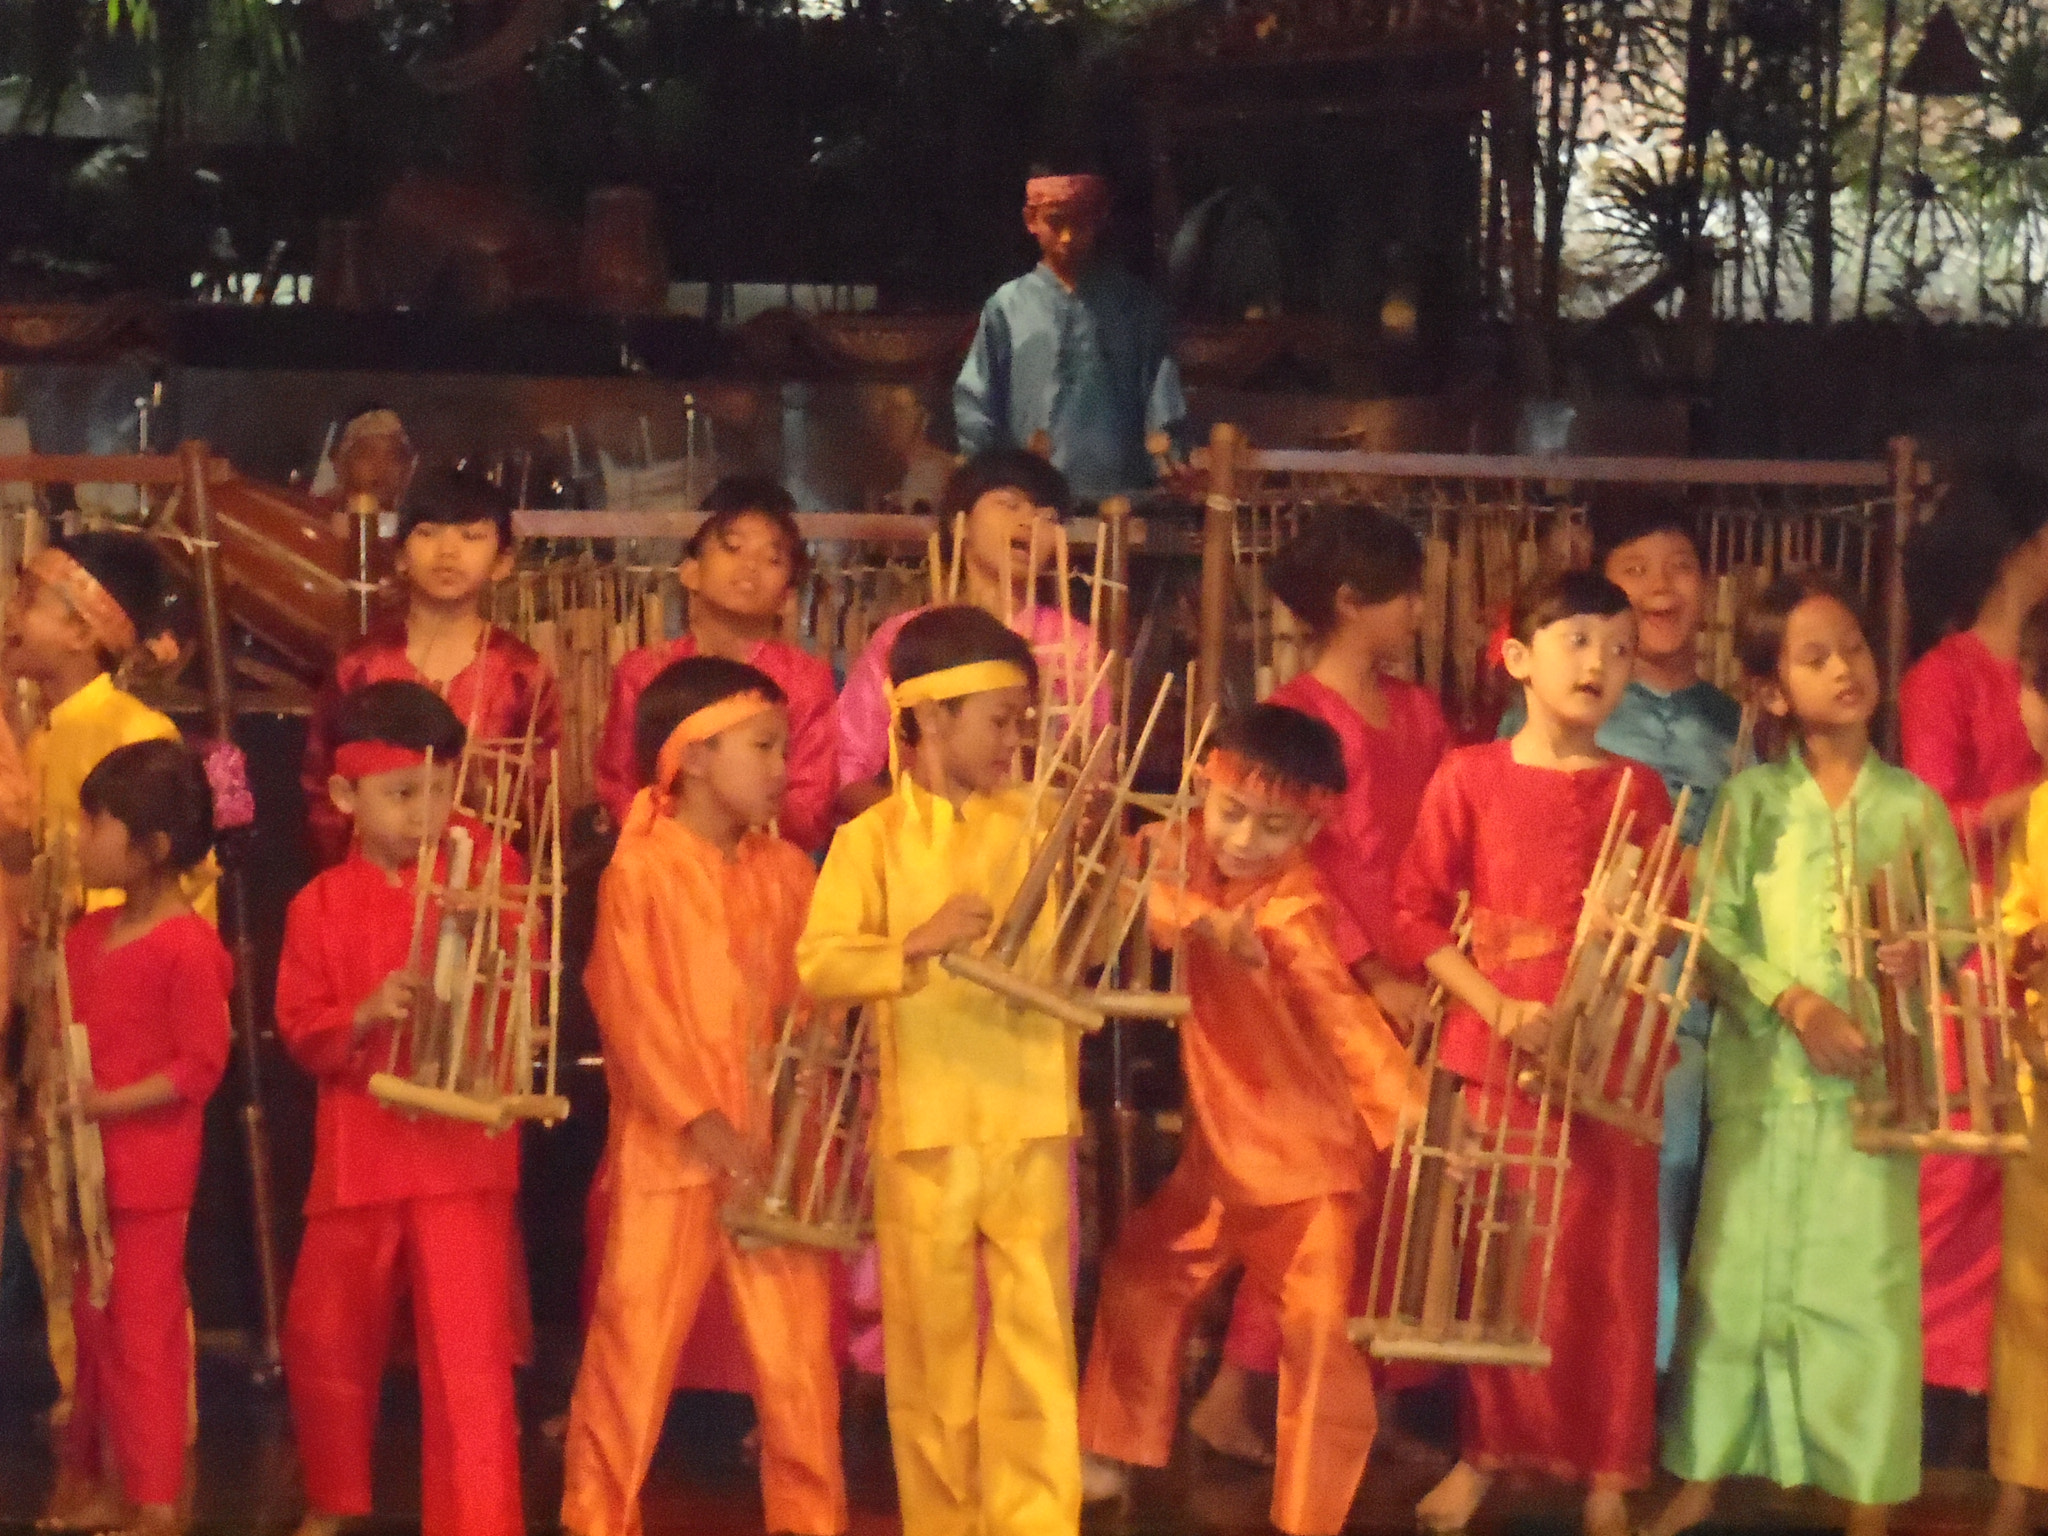 Olympus uTough-3000 sample photo. Children angklung orhestra. arngklung is west java's tradiional instrument made of bamboot t photography